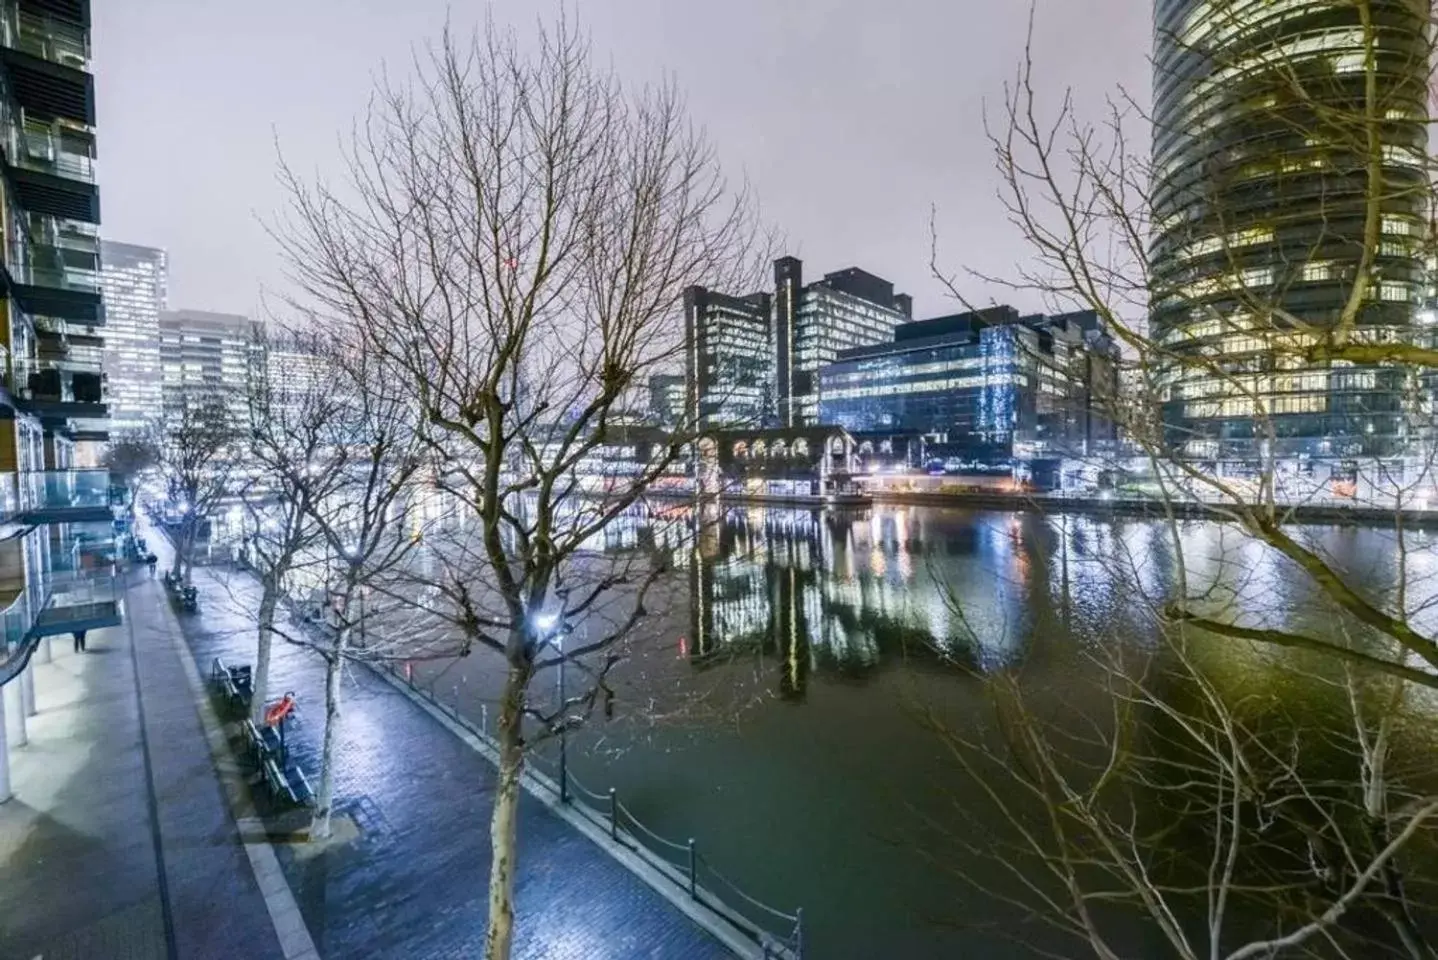 Night in Canary Wharf - Luxury Apartments